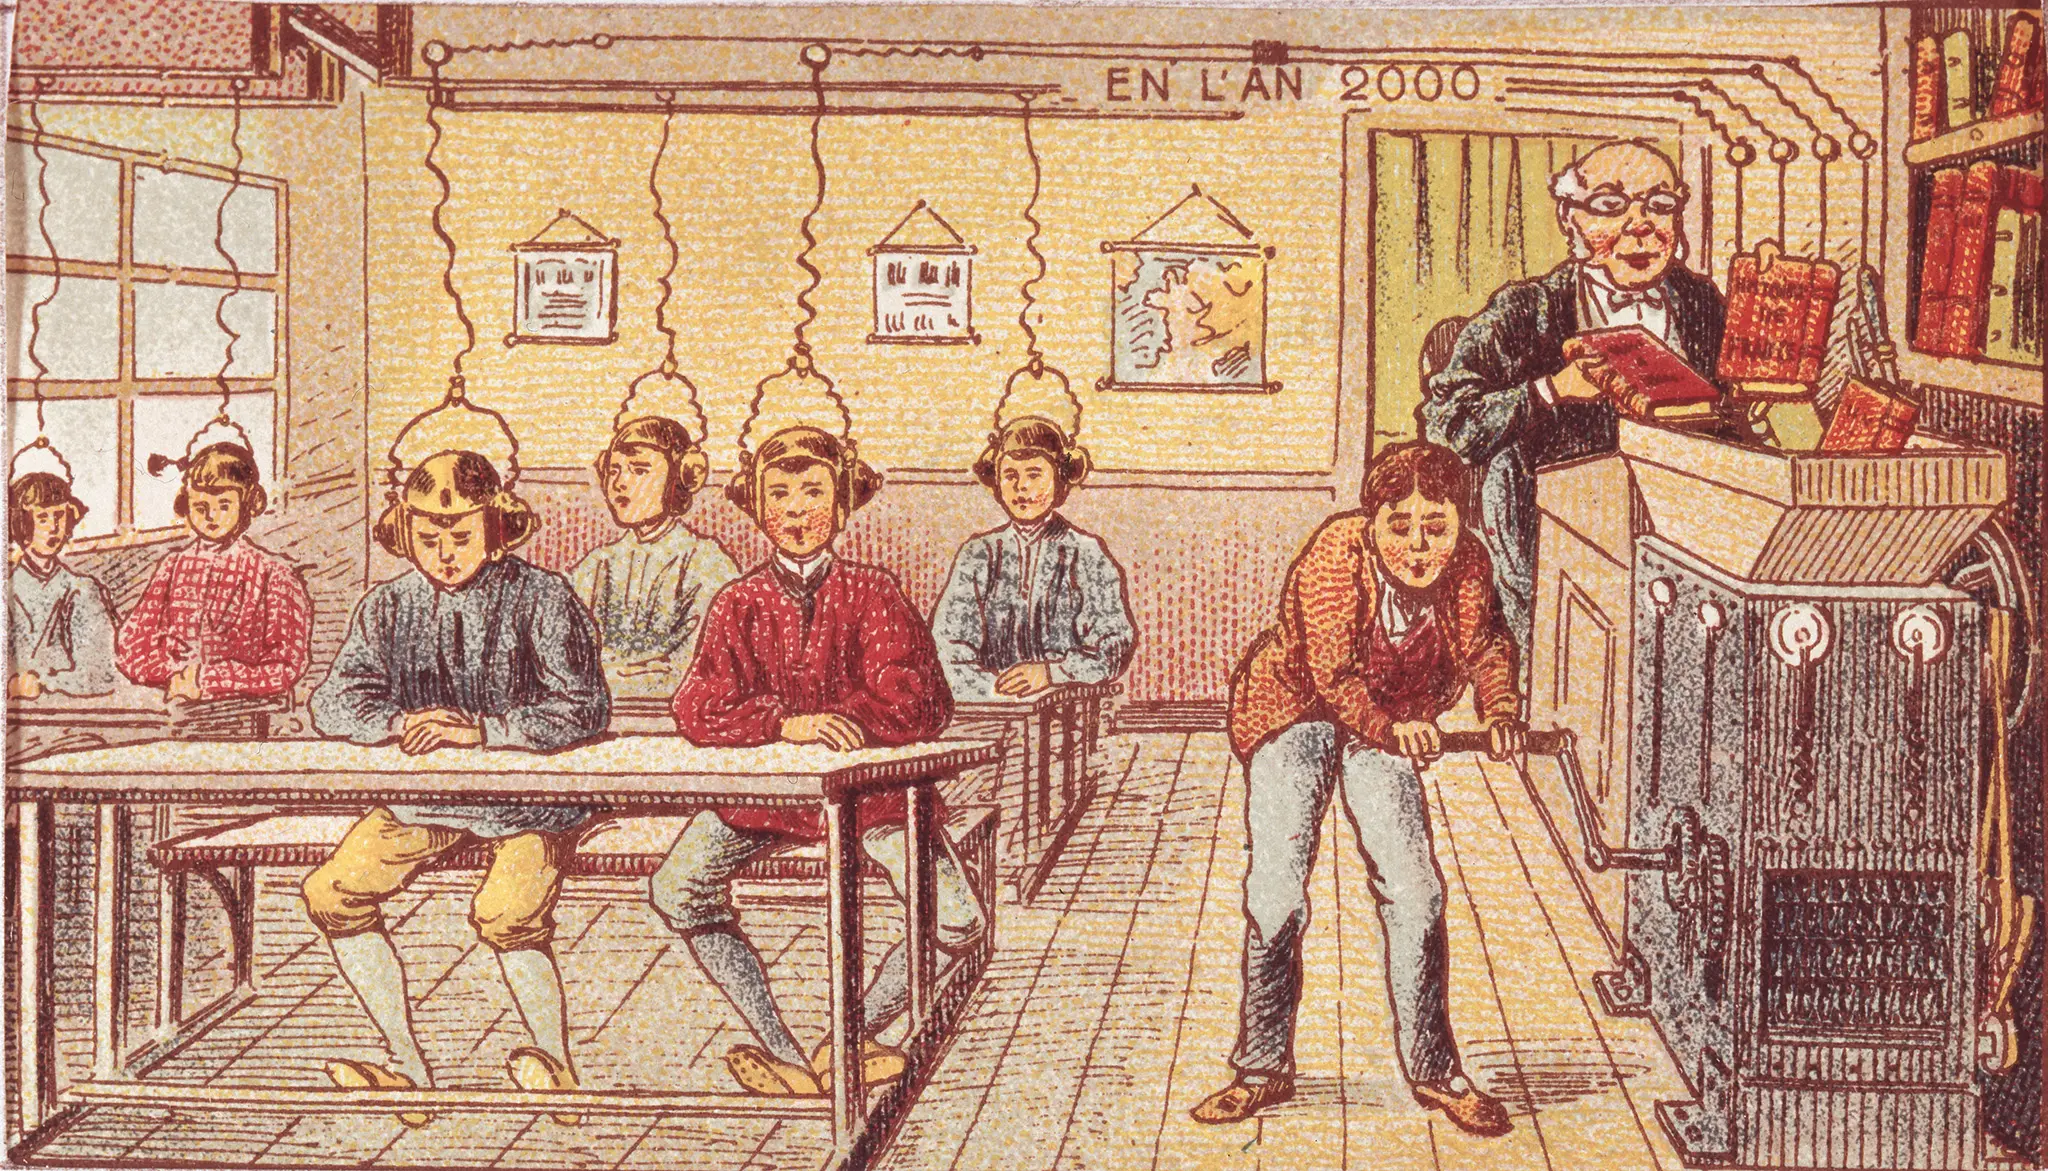 Radio in a school classroom in the year 2000 as imagined in 1900. A teacher feeds books into a machine that transfers the information via audio to the students' headphones.